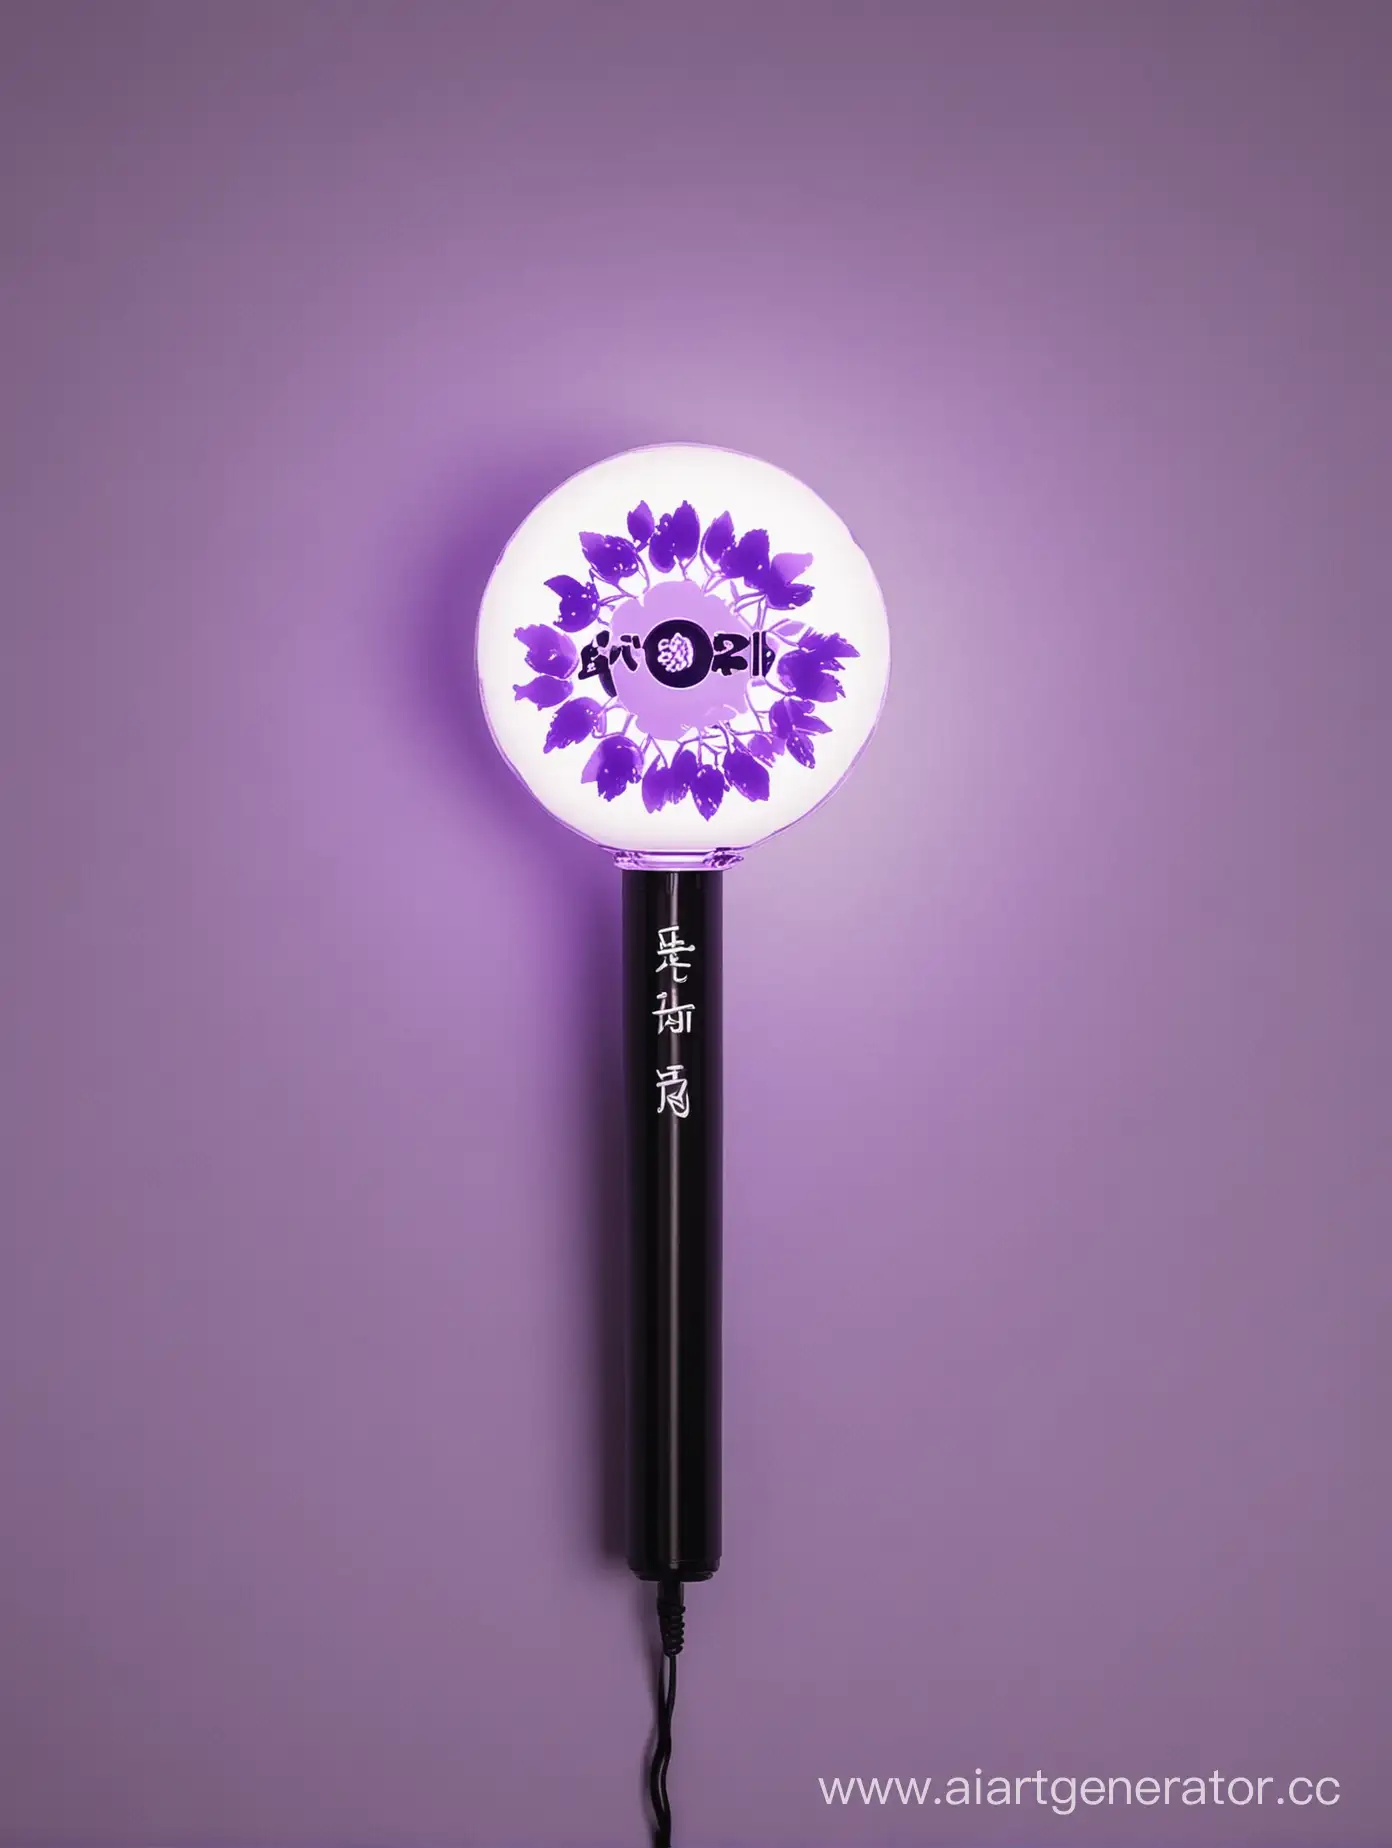 Lightstick of the kpop group ROPHILES, round shape, the name of the group inside the lightstick, purple, black, and white, with flower figures inside